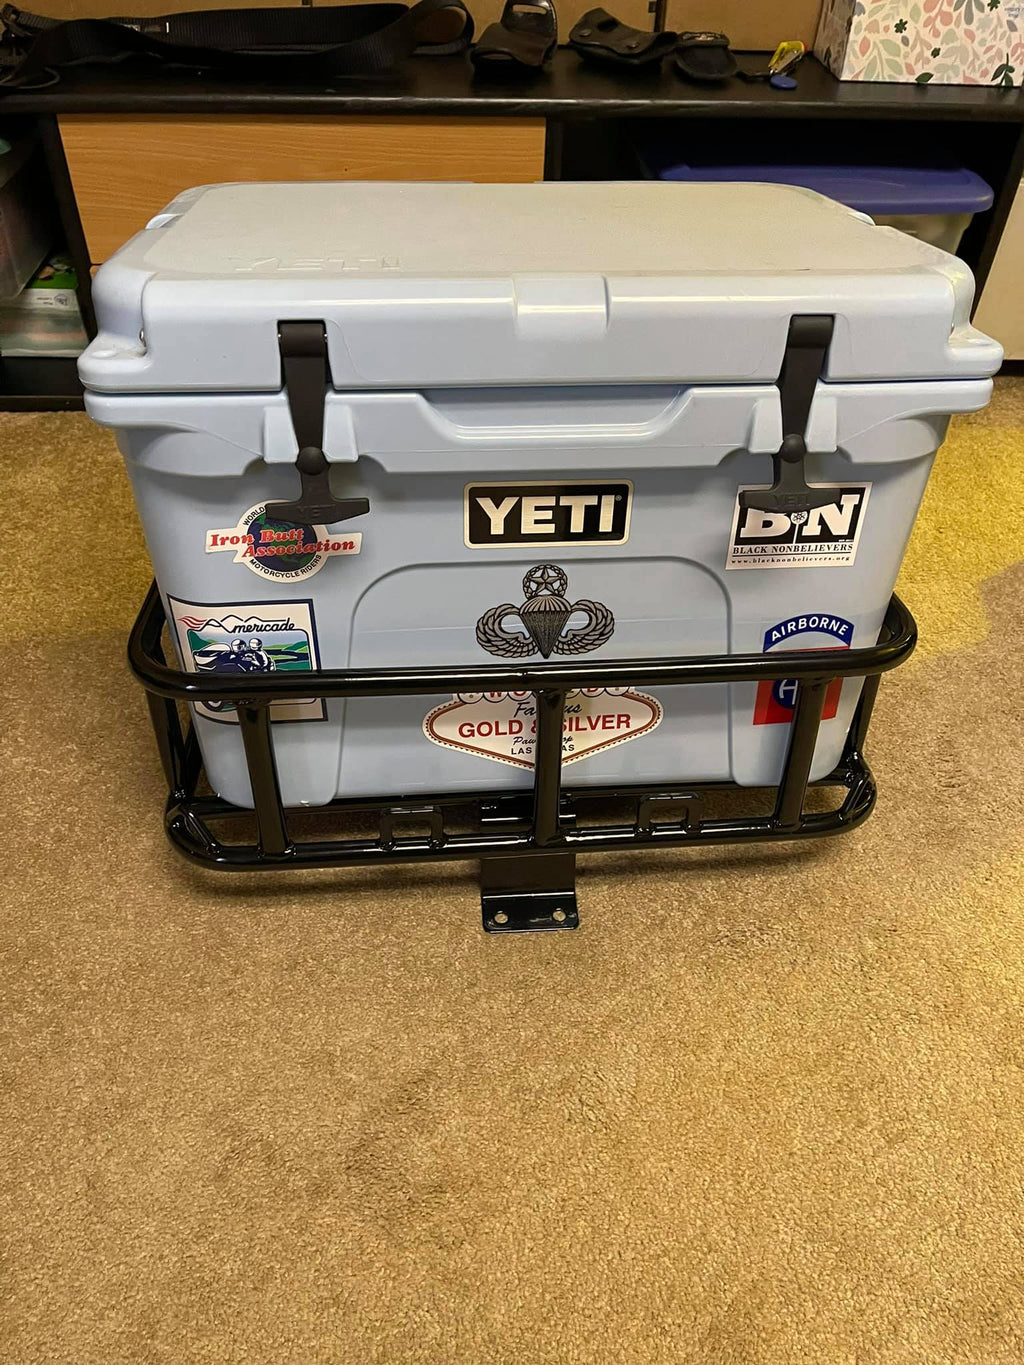  Slognn YETI Cooler Mount - Hitch Mount Kit for Yeti Tundra 35  or 45 Cooler - Cooler Kit attaches to The Base Deck (Sold Separately) :  Sports & Outdoors